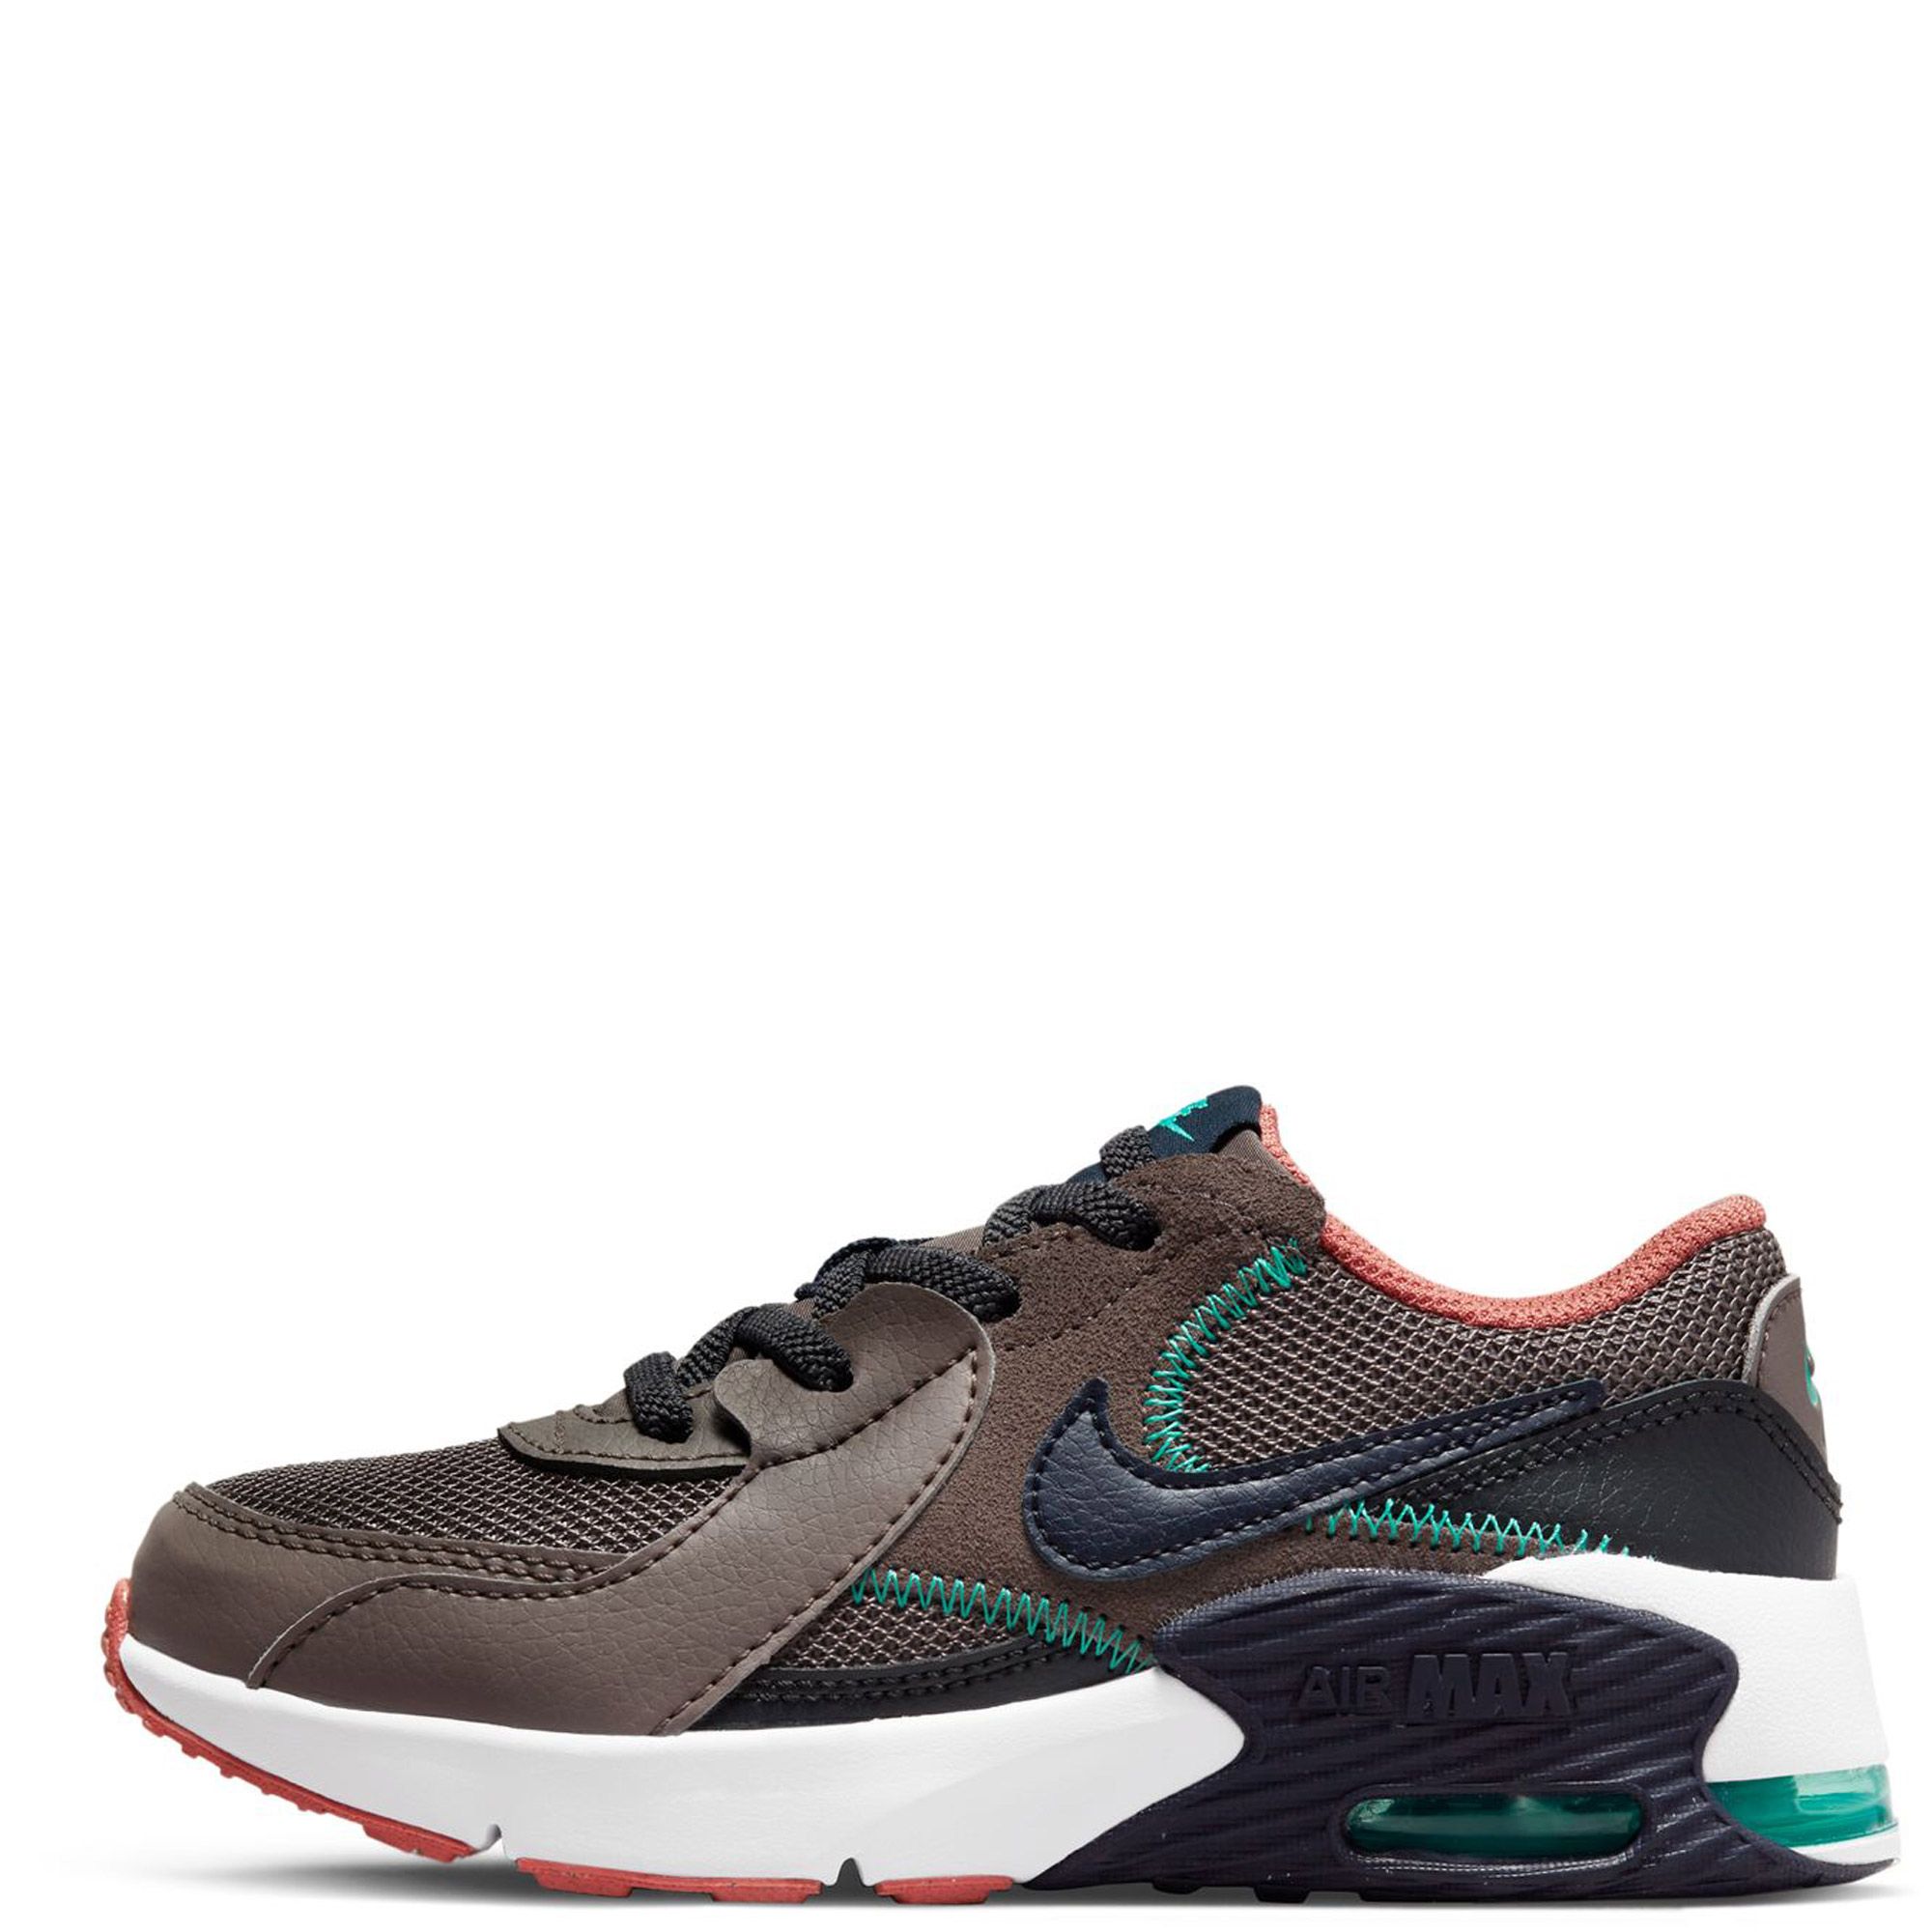 Nike Air Max Excee Women's Shoes.